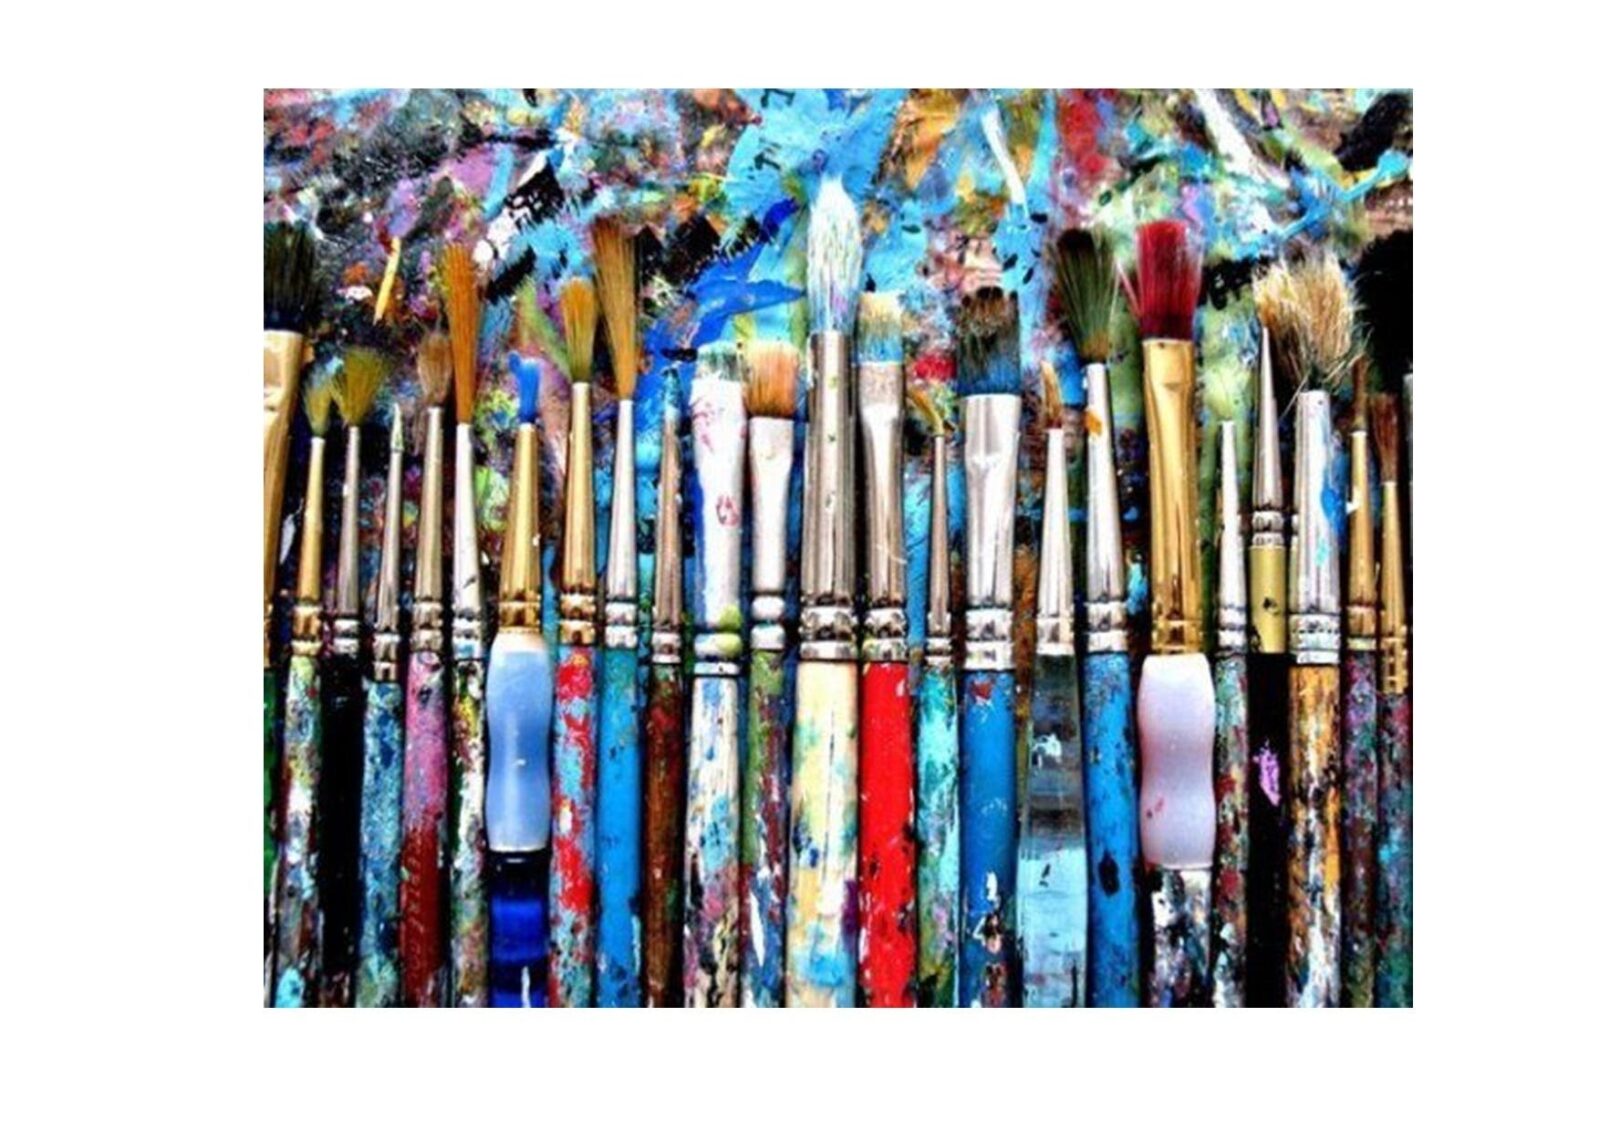 artists brushes